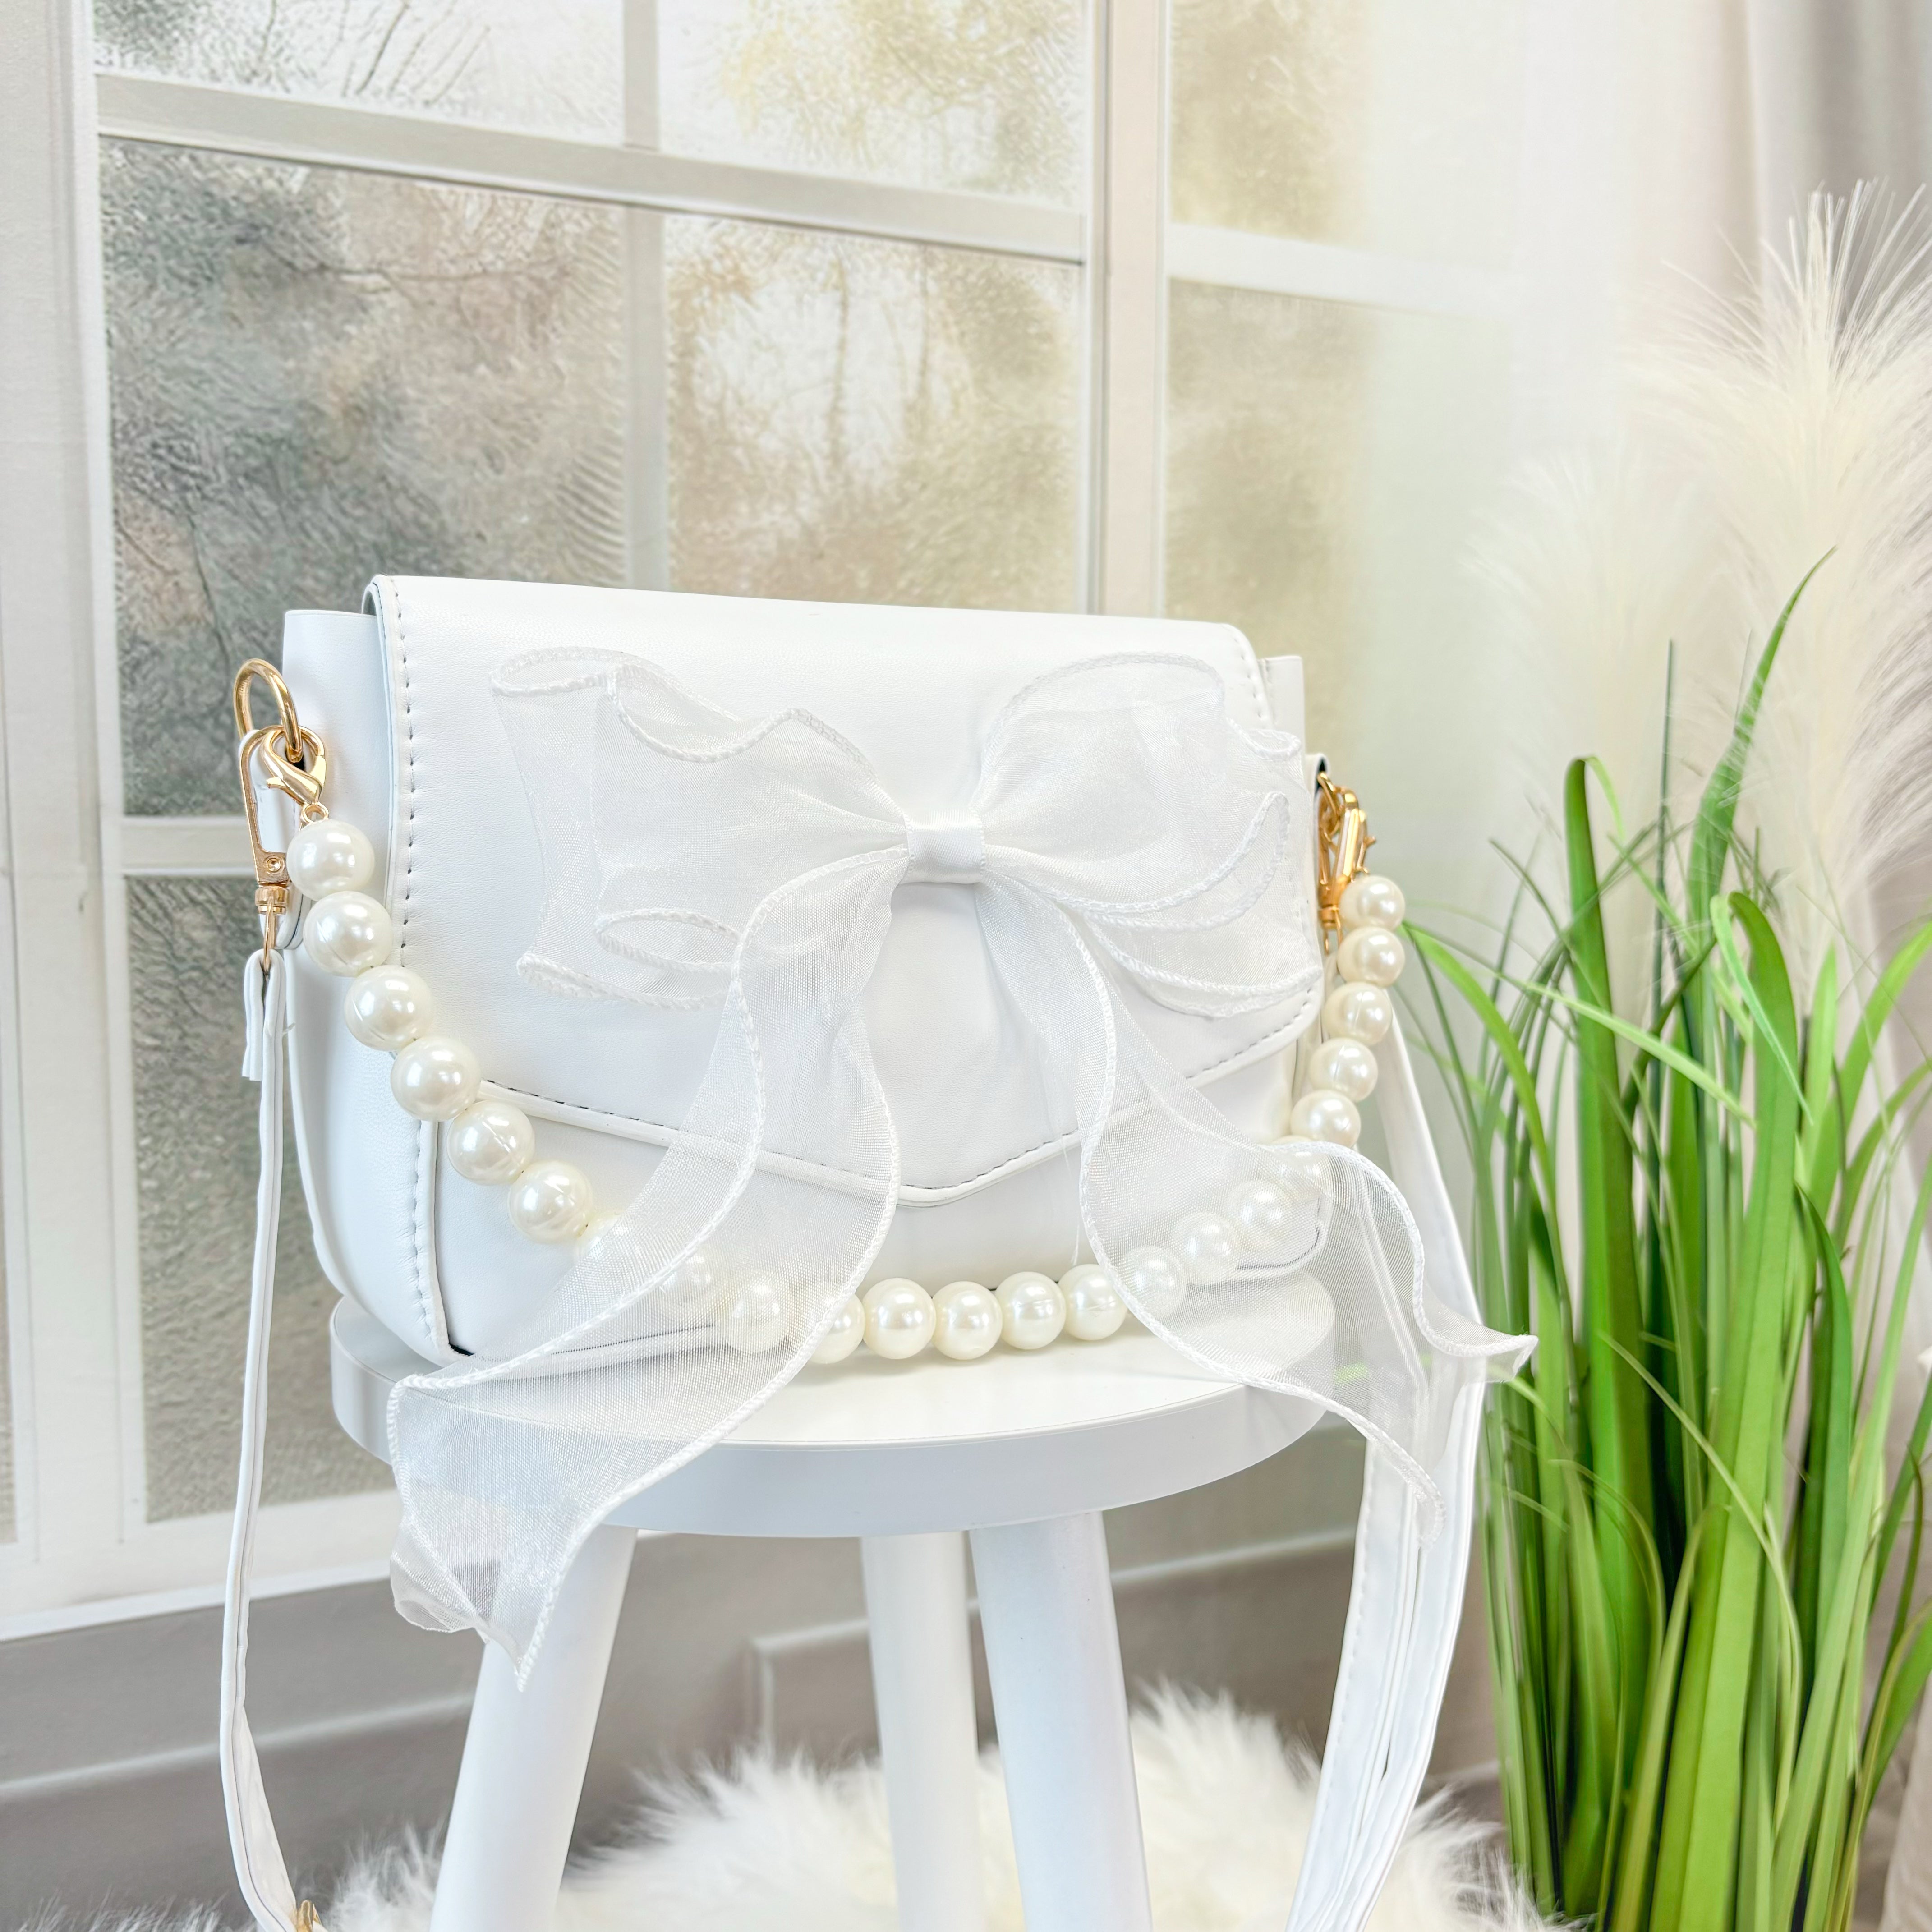 WHITE BOW BAG WITH PEARL HANDLE